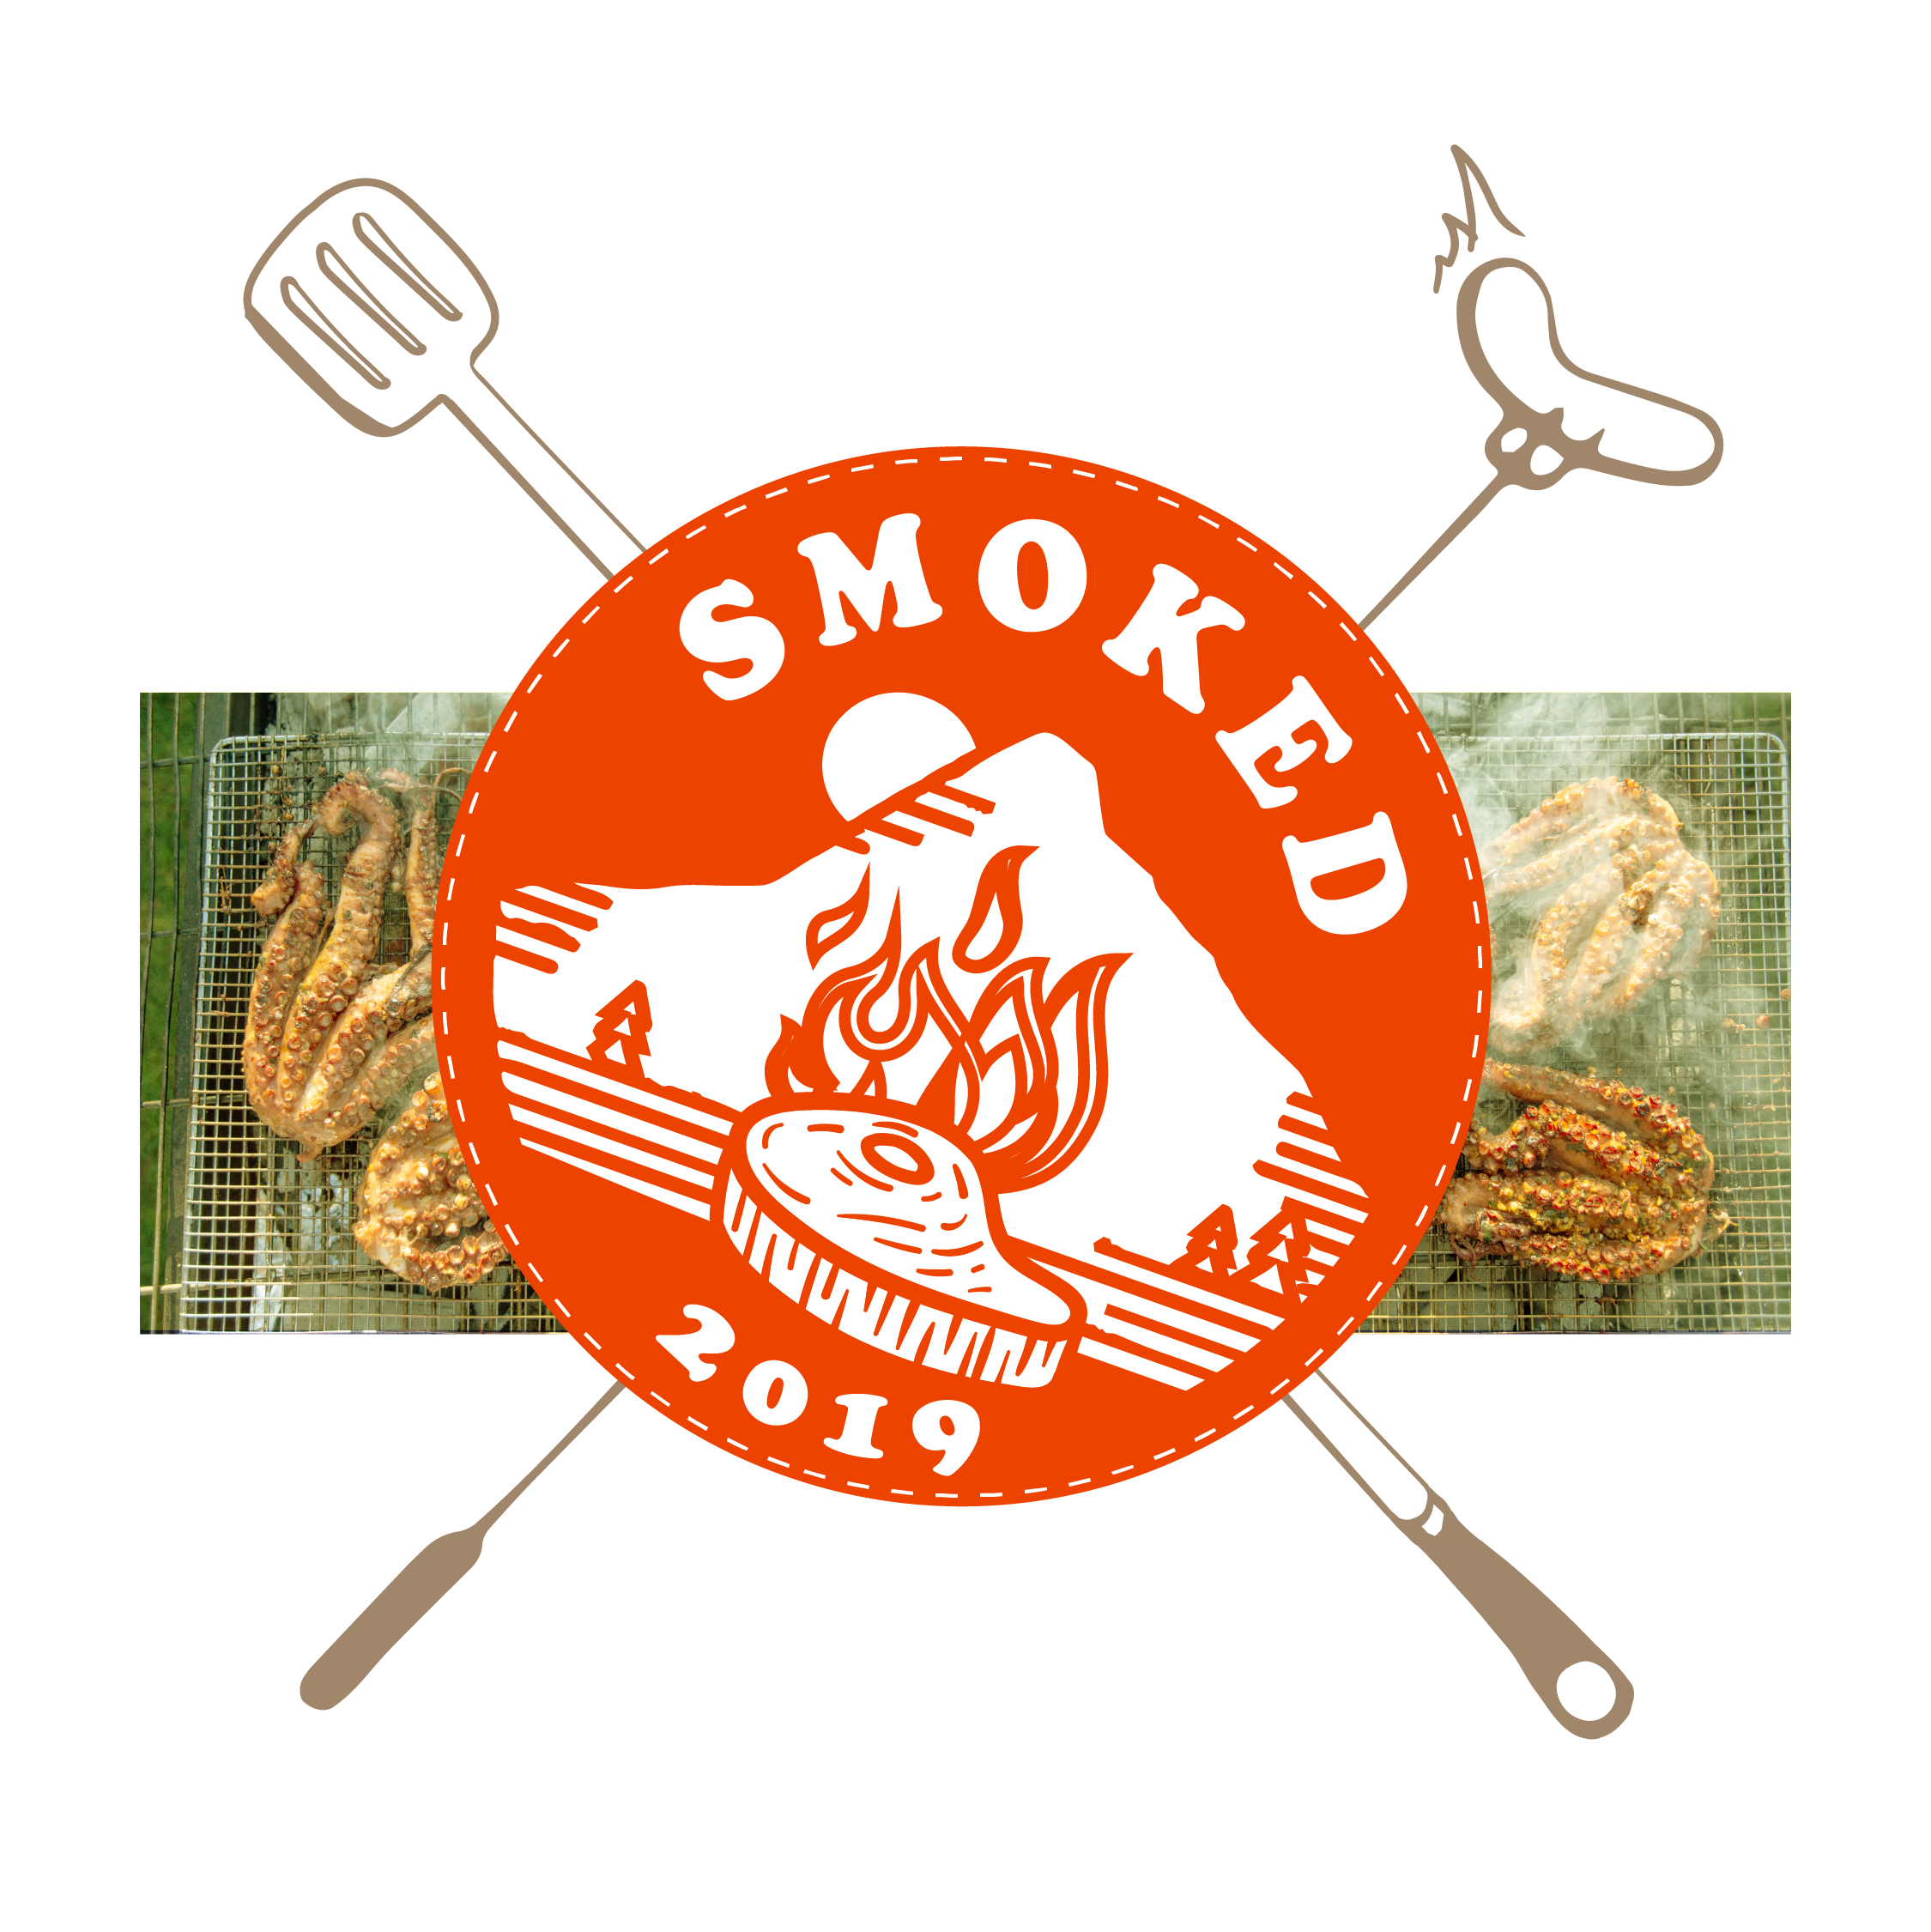 Feast even ID for Smoked 2019, with colorful red depiction of steak in front of mount hood